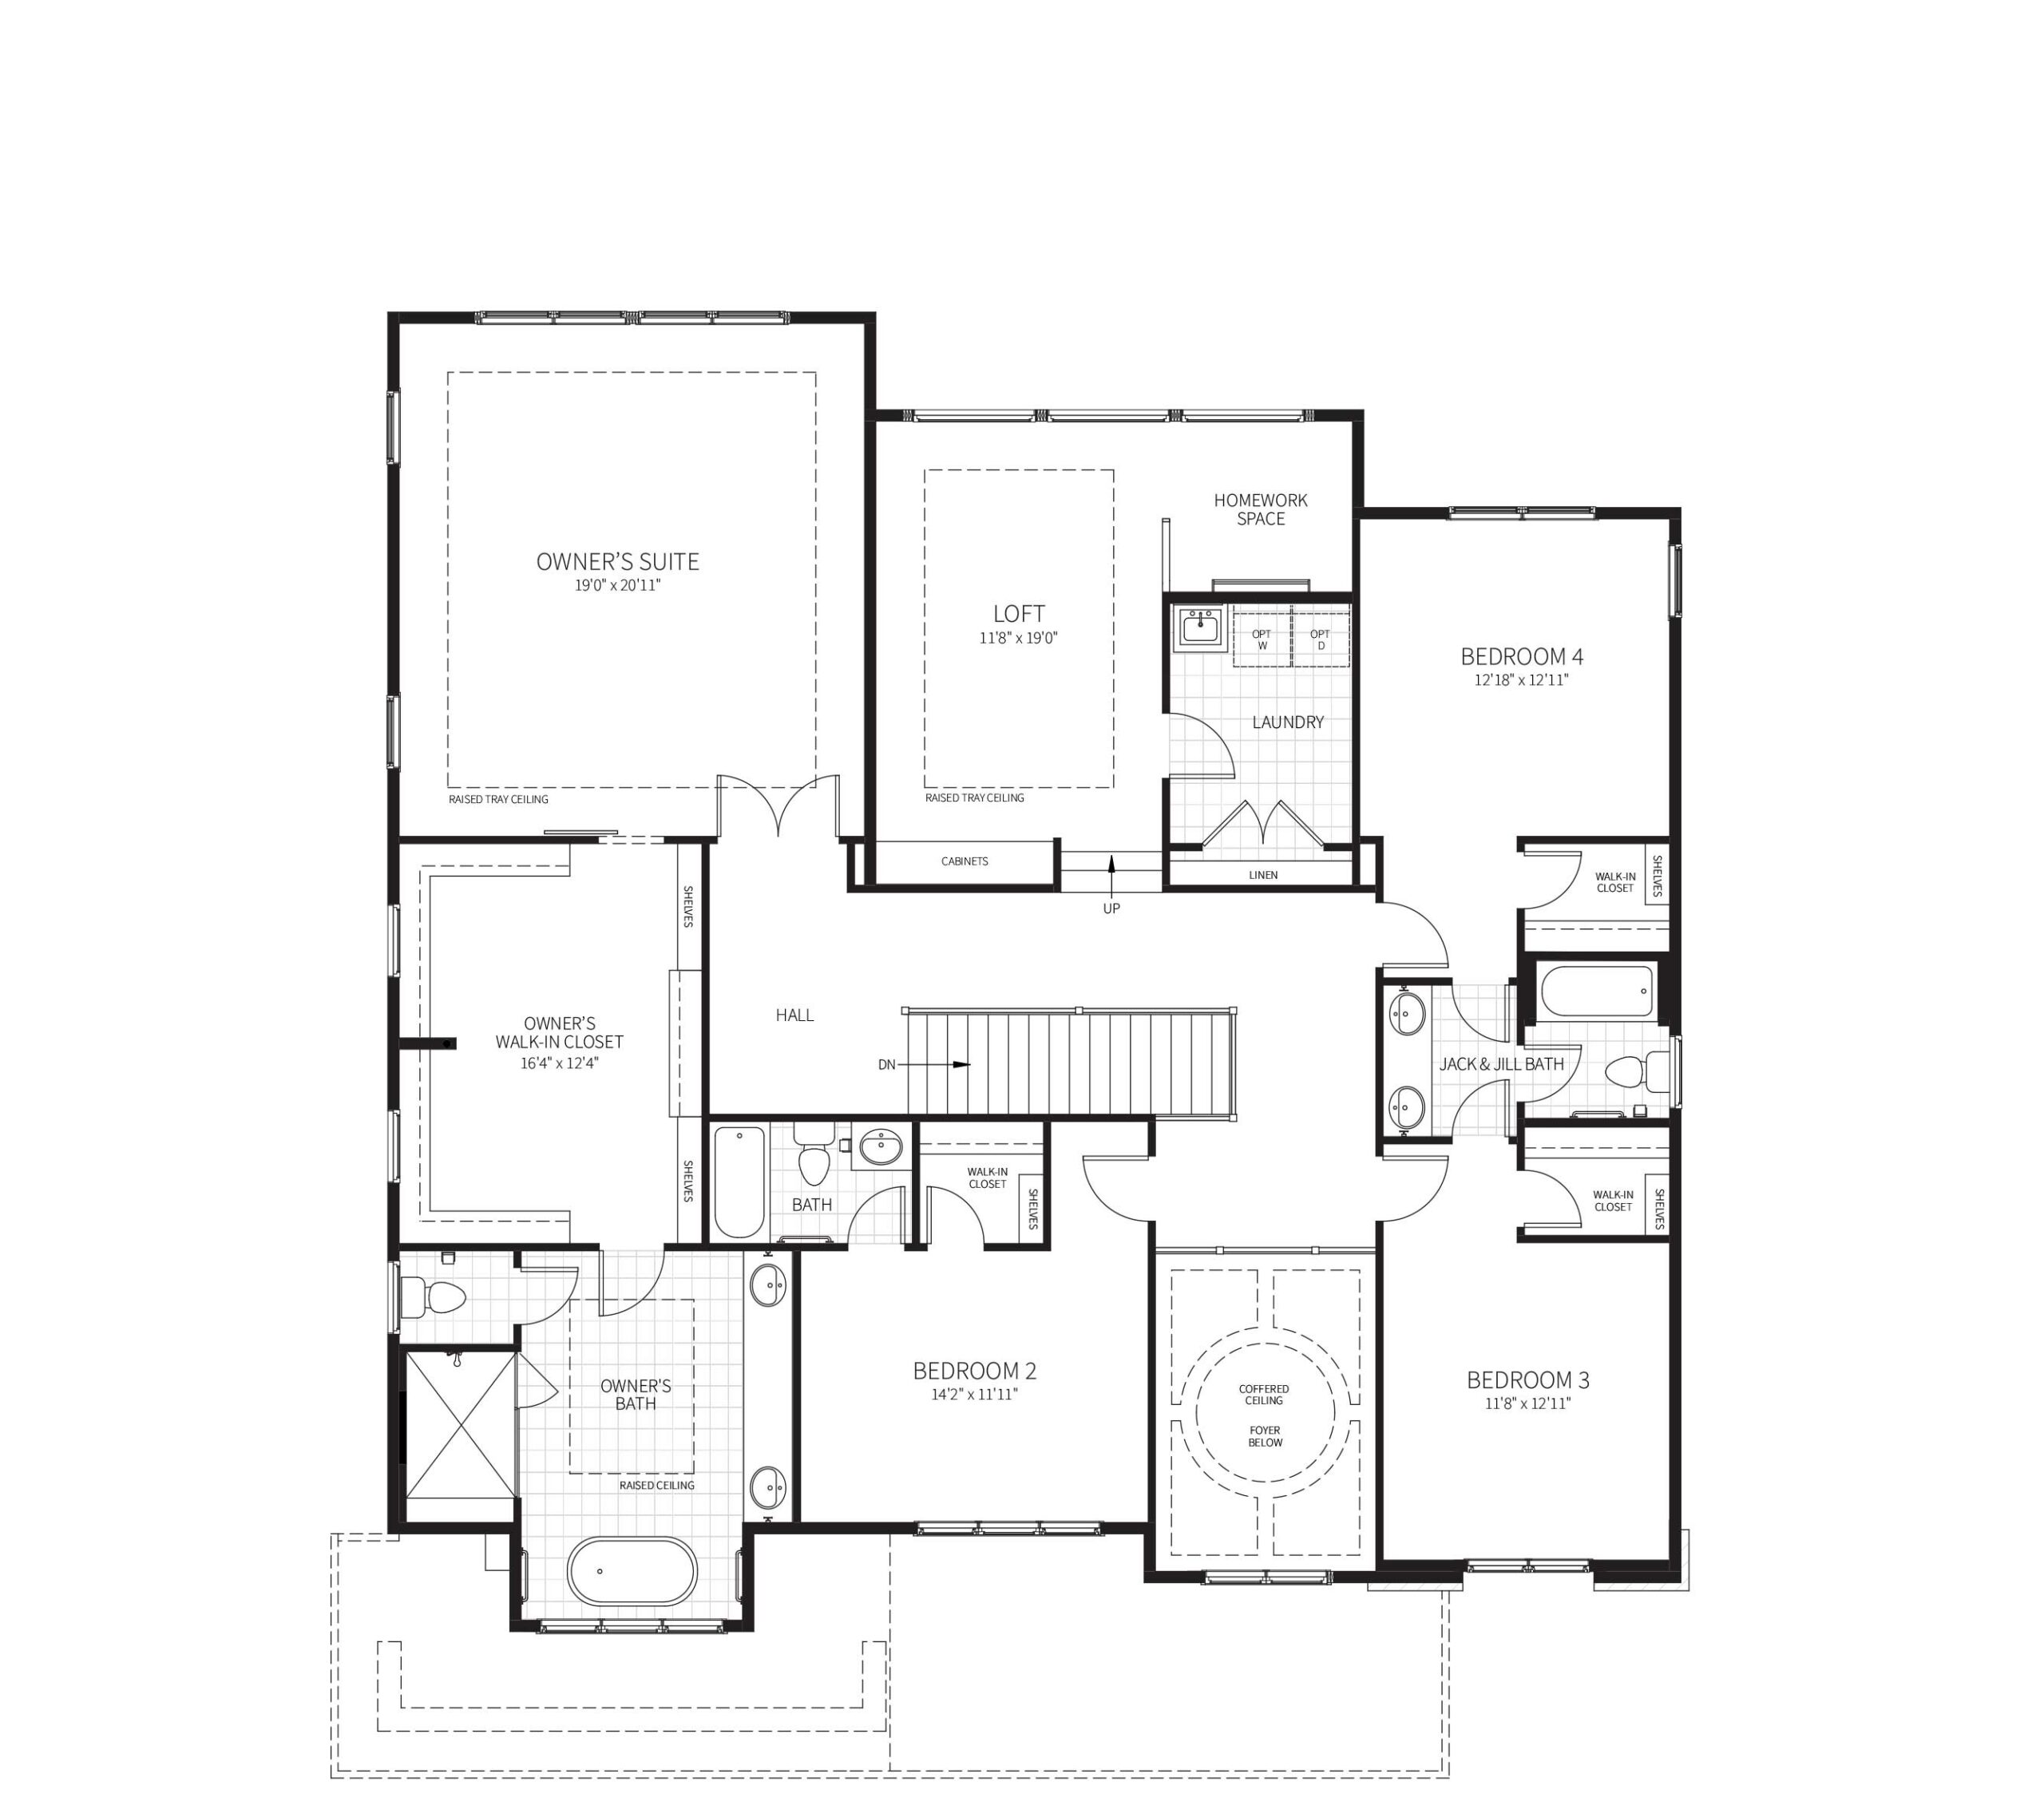 The second floor plan of the home under construction at 6519 Elgin Ln including raised Loft and large Owner's Suite.